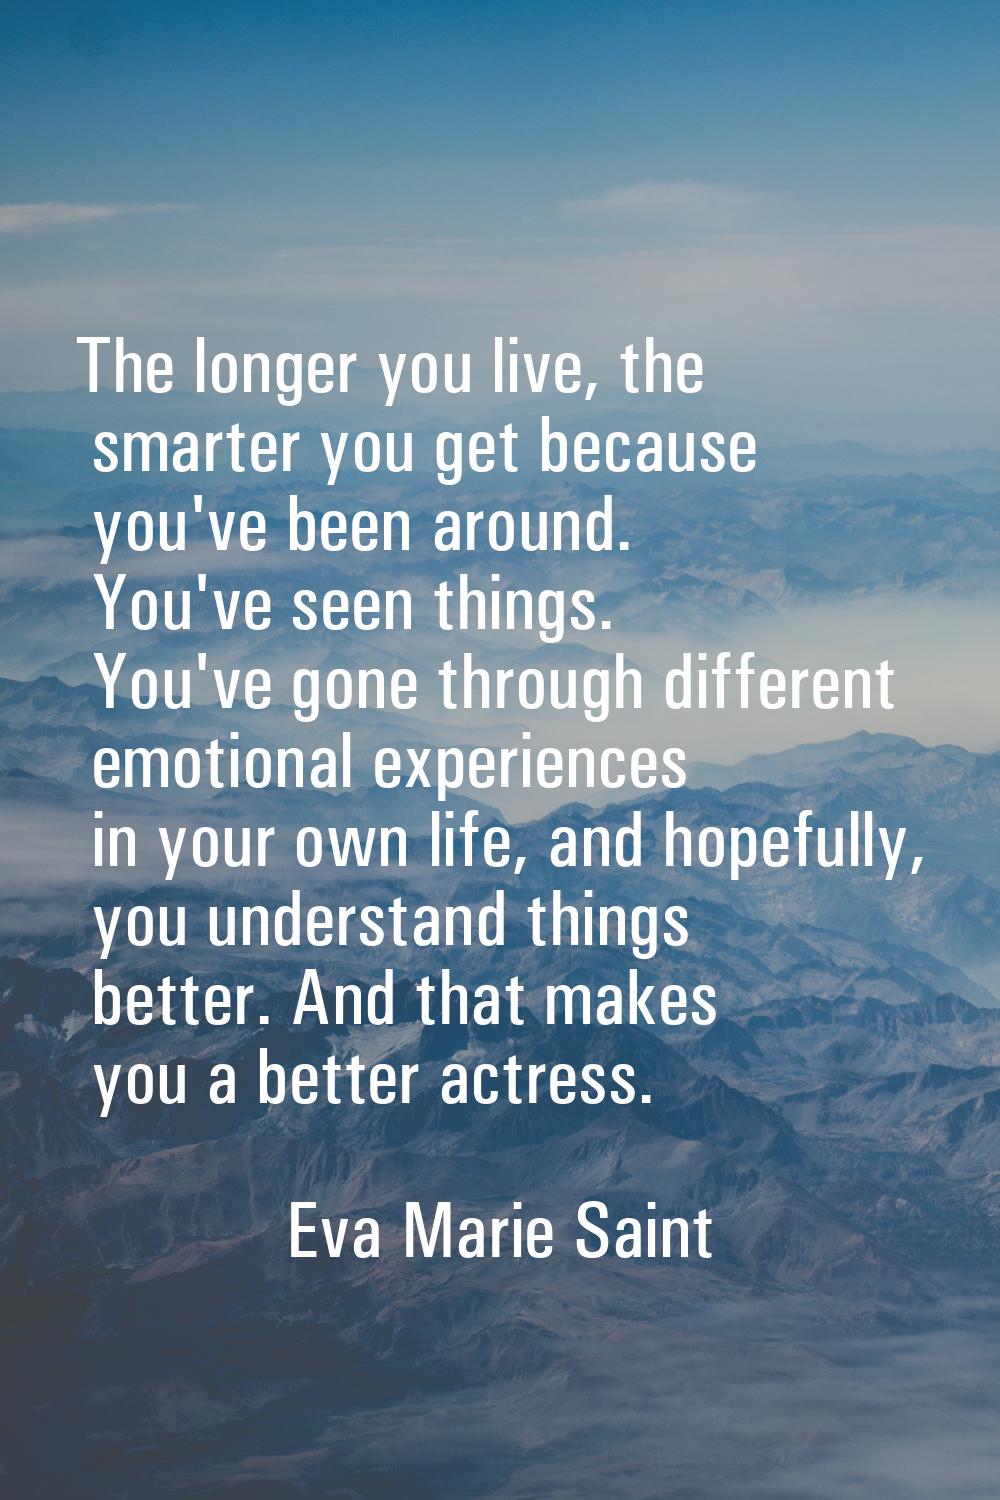 The longer you live, the smarter you get because you've been around. You've seen things. You've gon